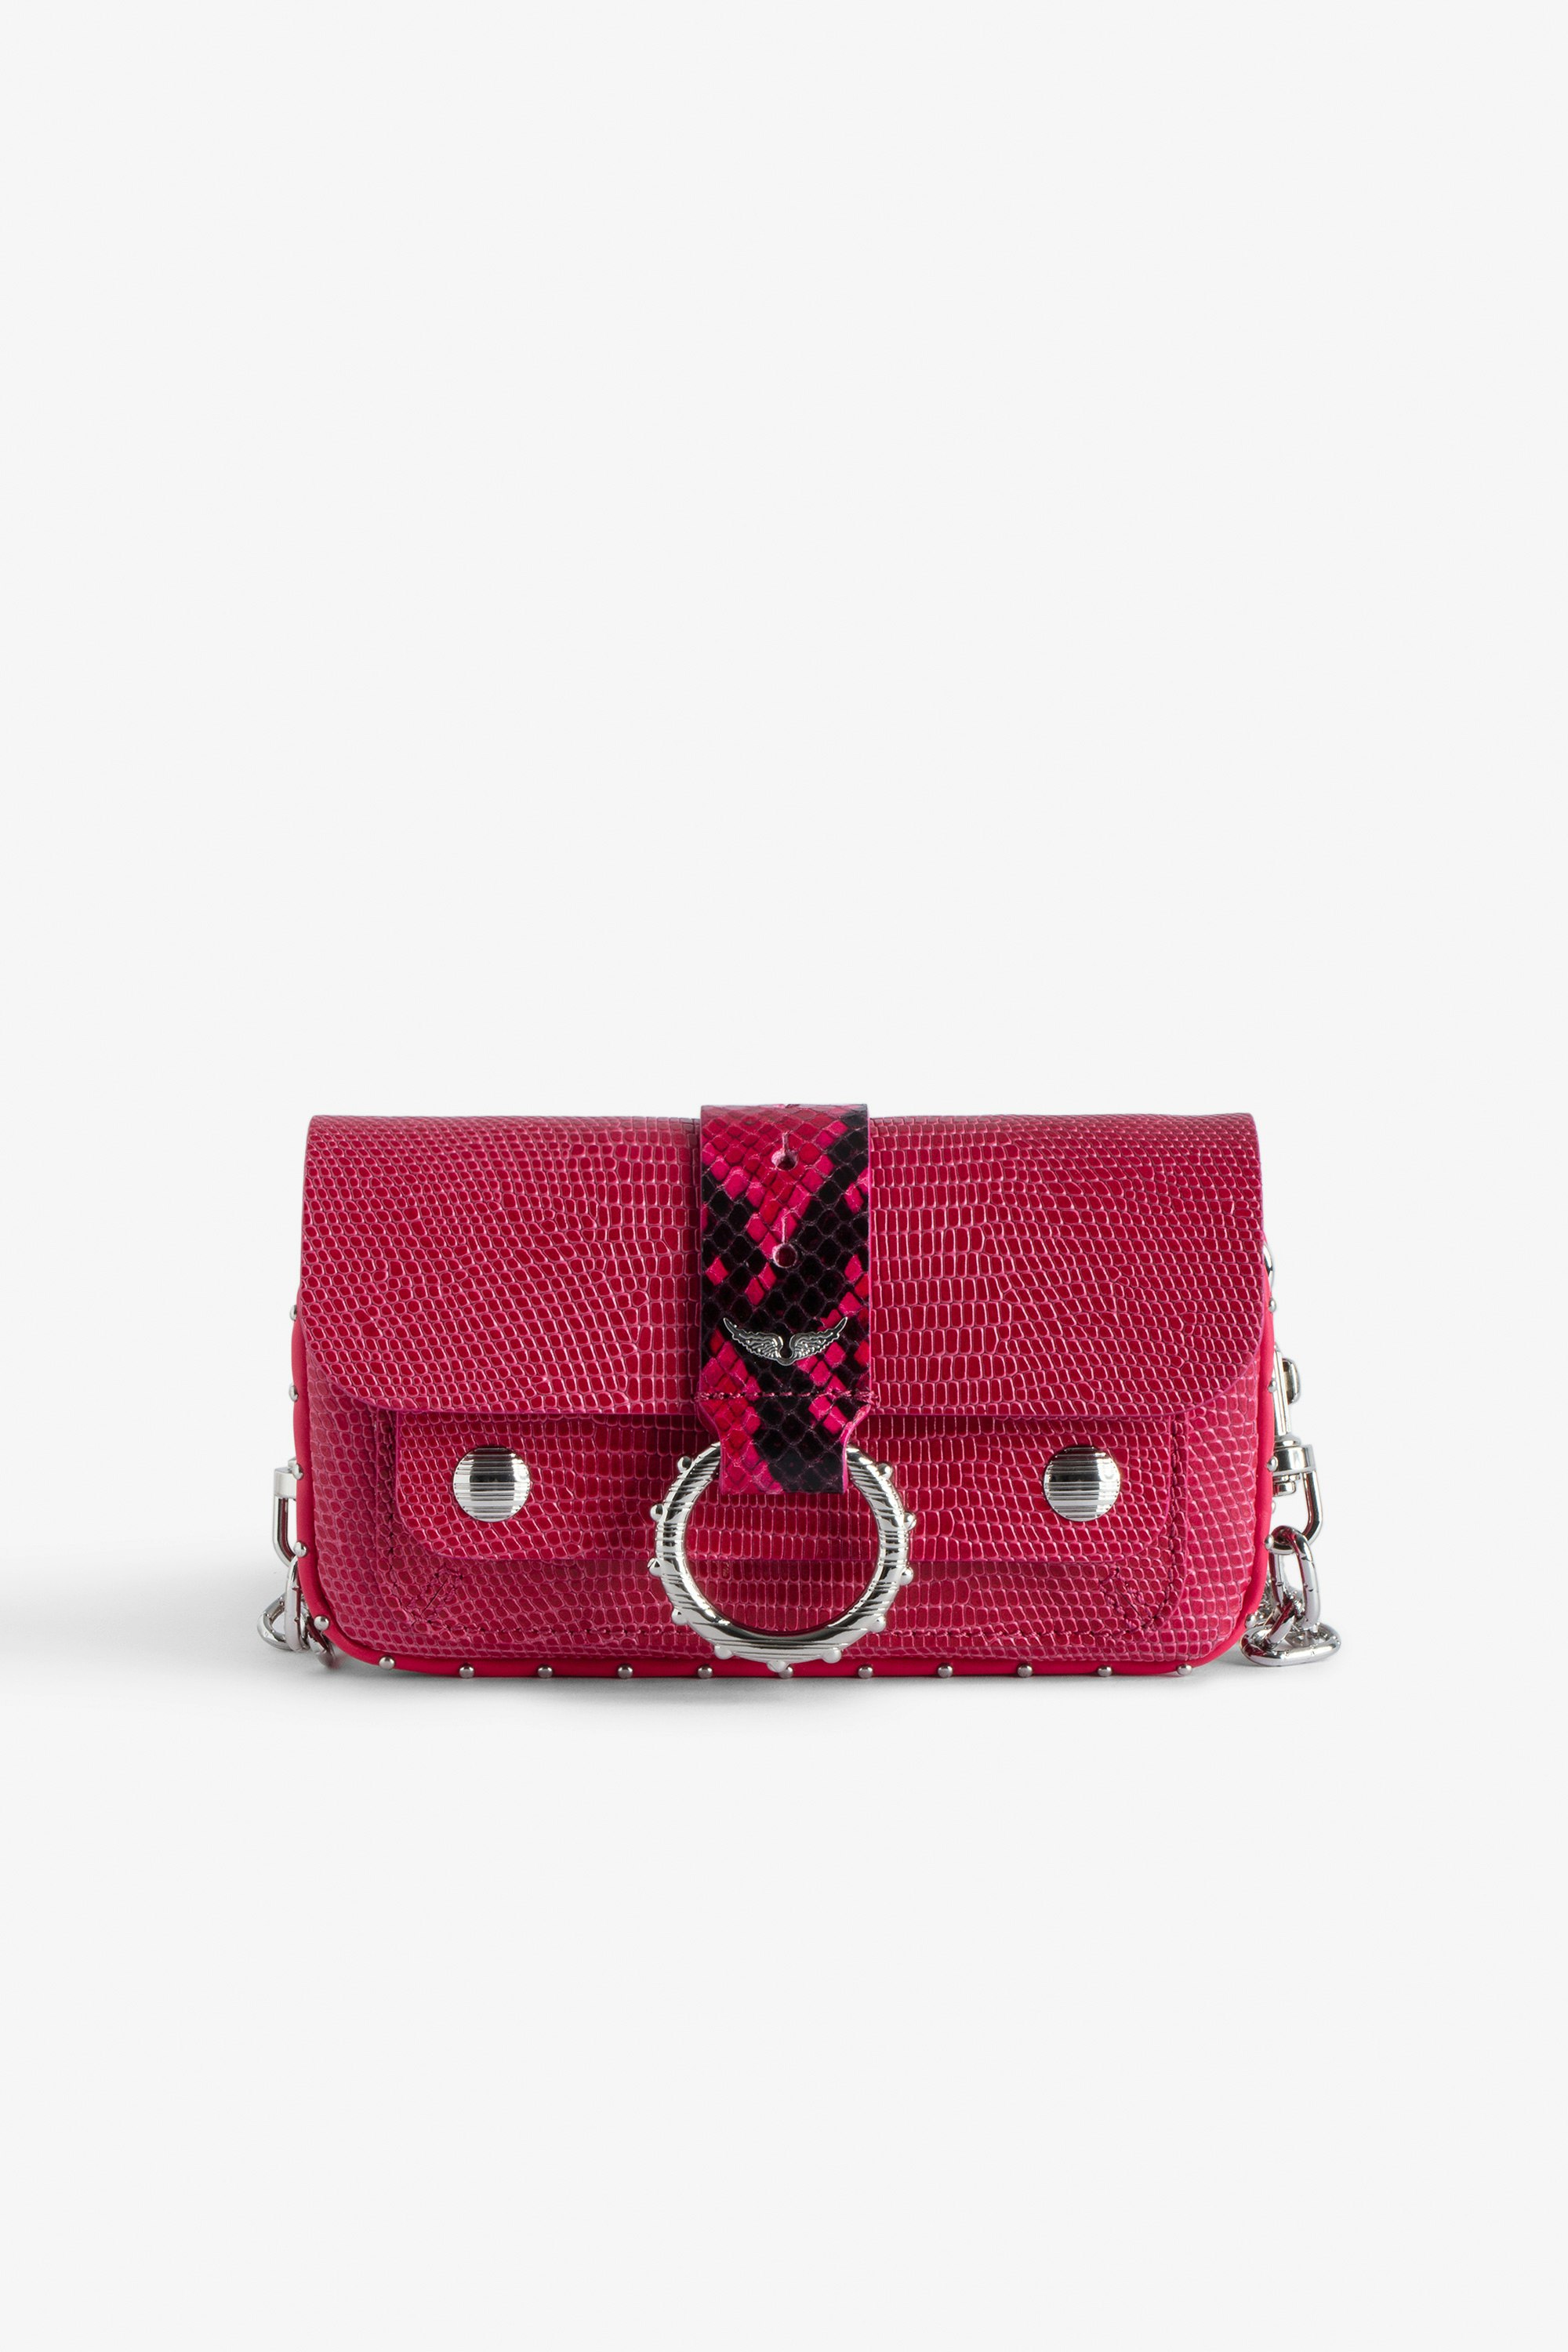 Kate Wallet Embossed Bag - Women’s pink iguana-embossed leather mini bag with metal chain.